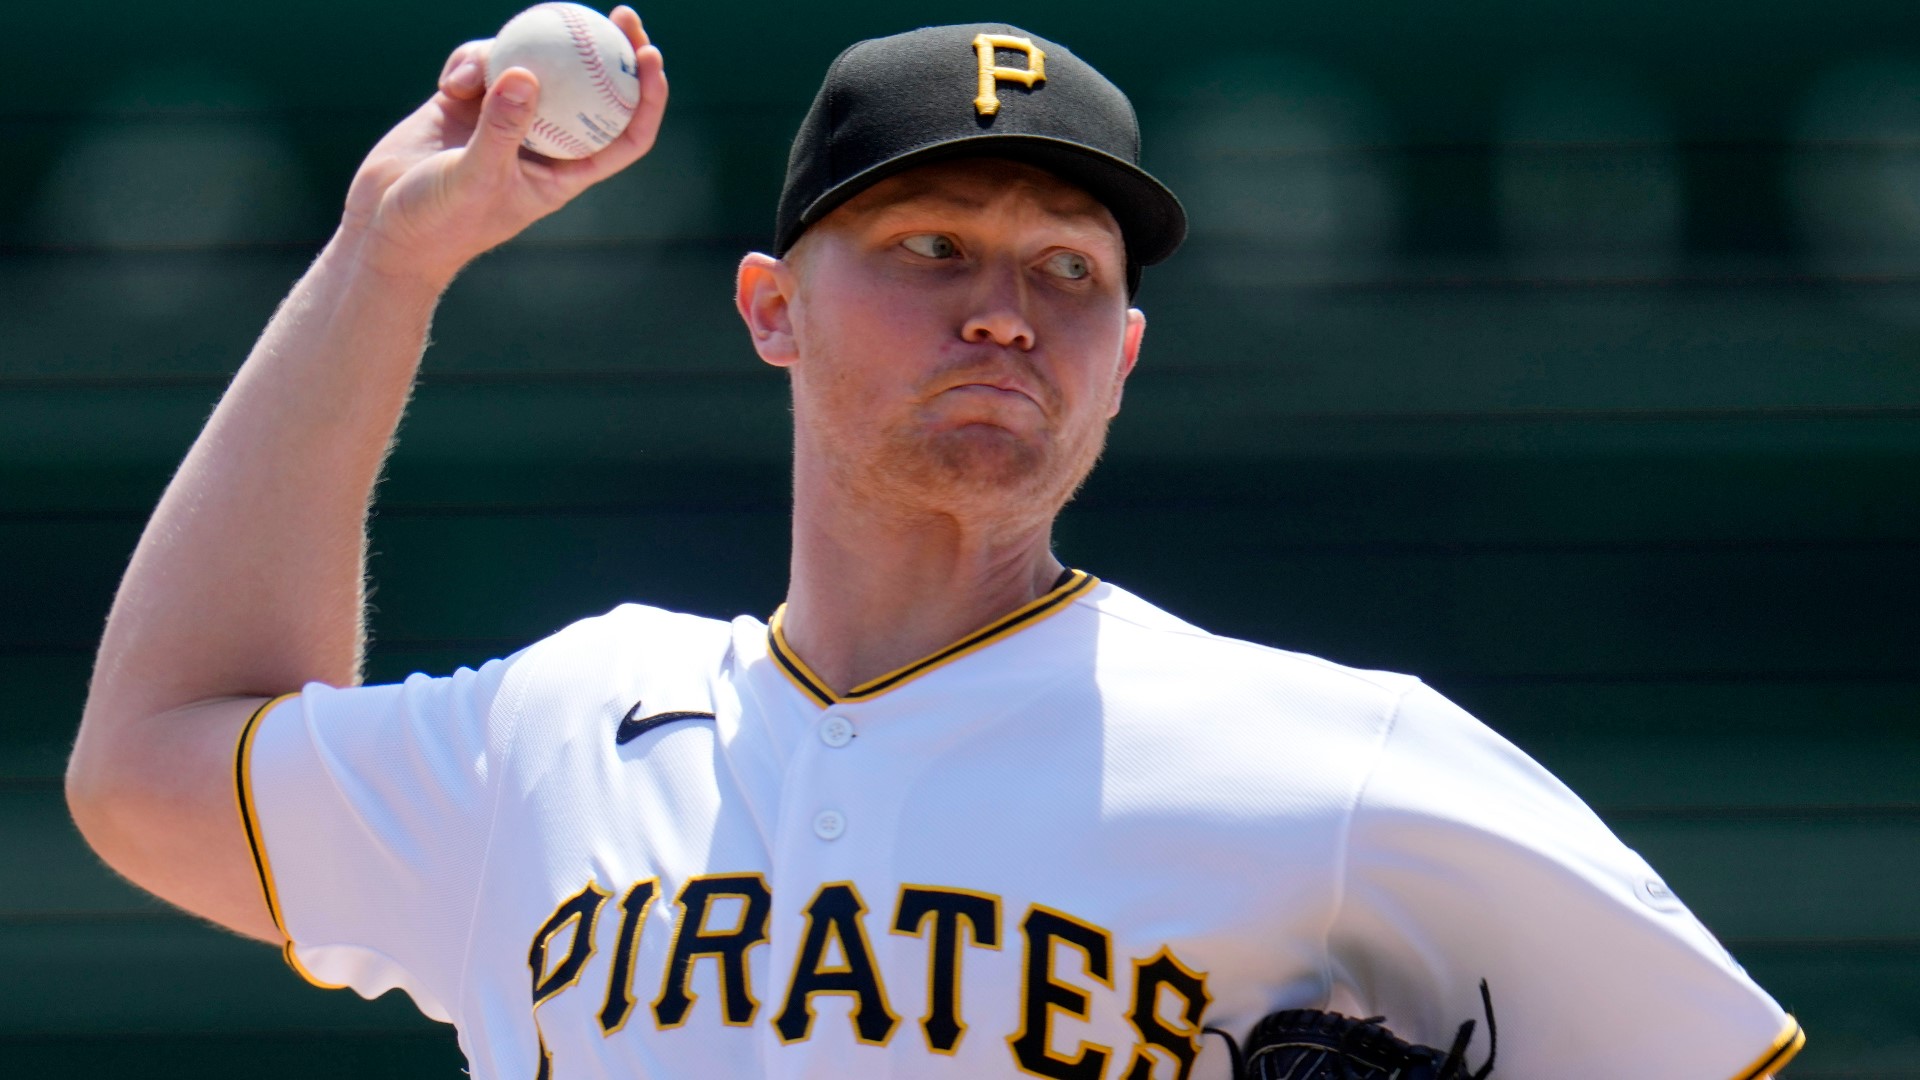 The Pirates pitcher is having a career-best year at age 27.